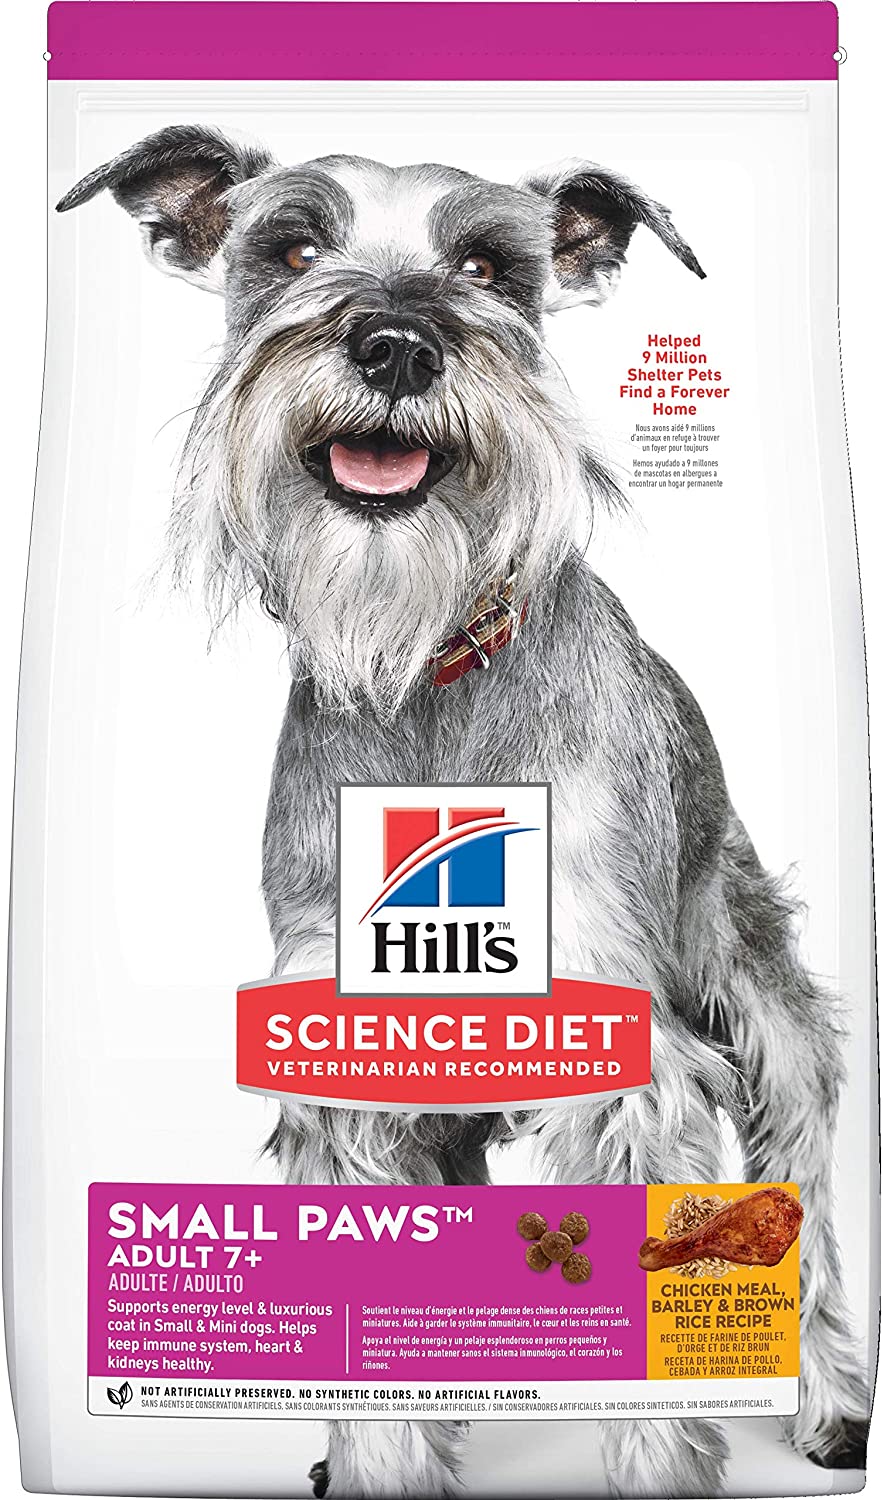 Hill's Science Diet Senior Adult 7+ Small Paws, Chicken Meal, Barley and Brown Rice Recipe 7.03KG